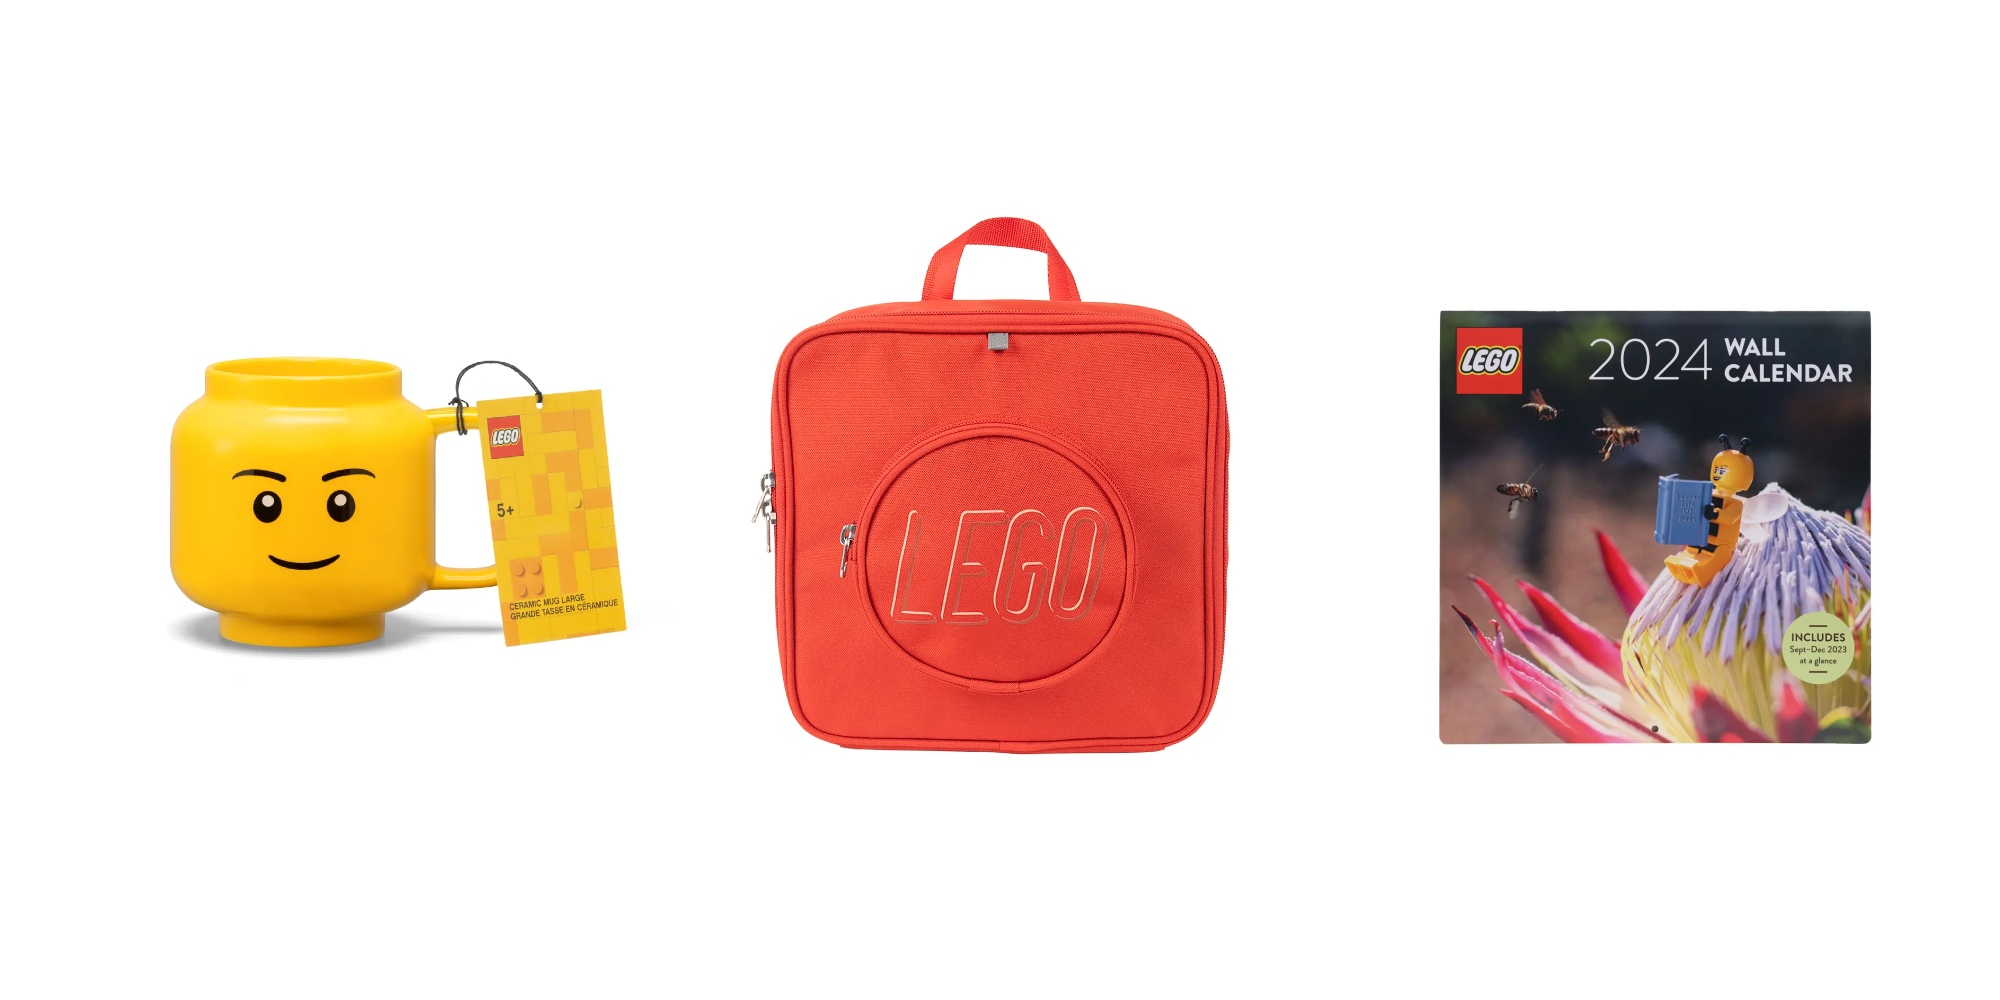 Header image for Best Lego Merch in 2024 with images of Minifigure ceramic mug, 1-stud backpack, and the LEGO 2024 wall calendar